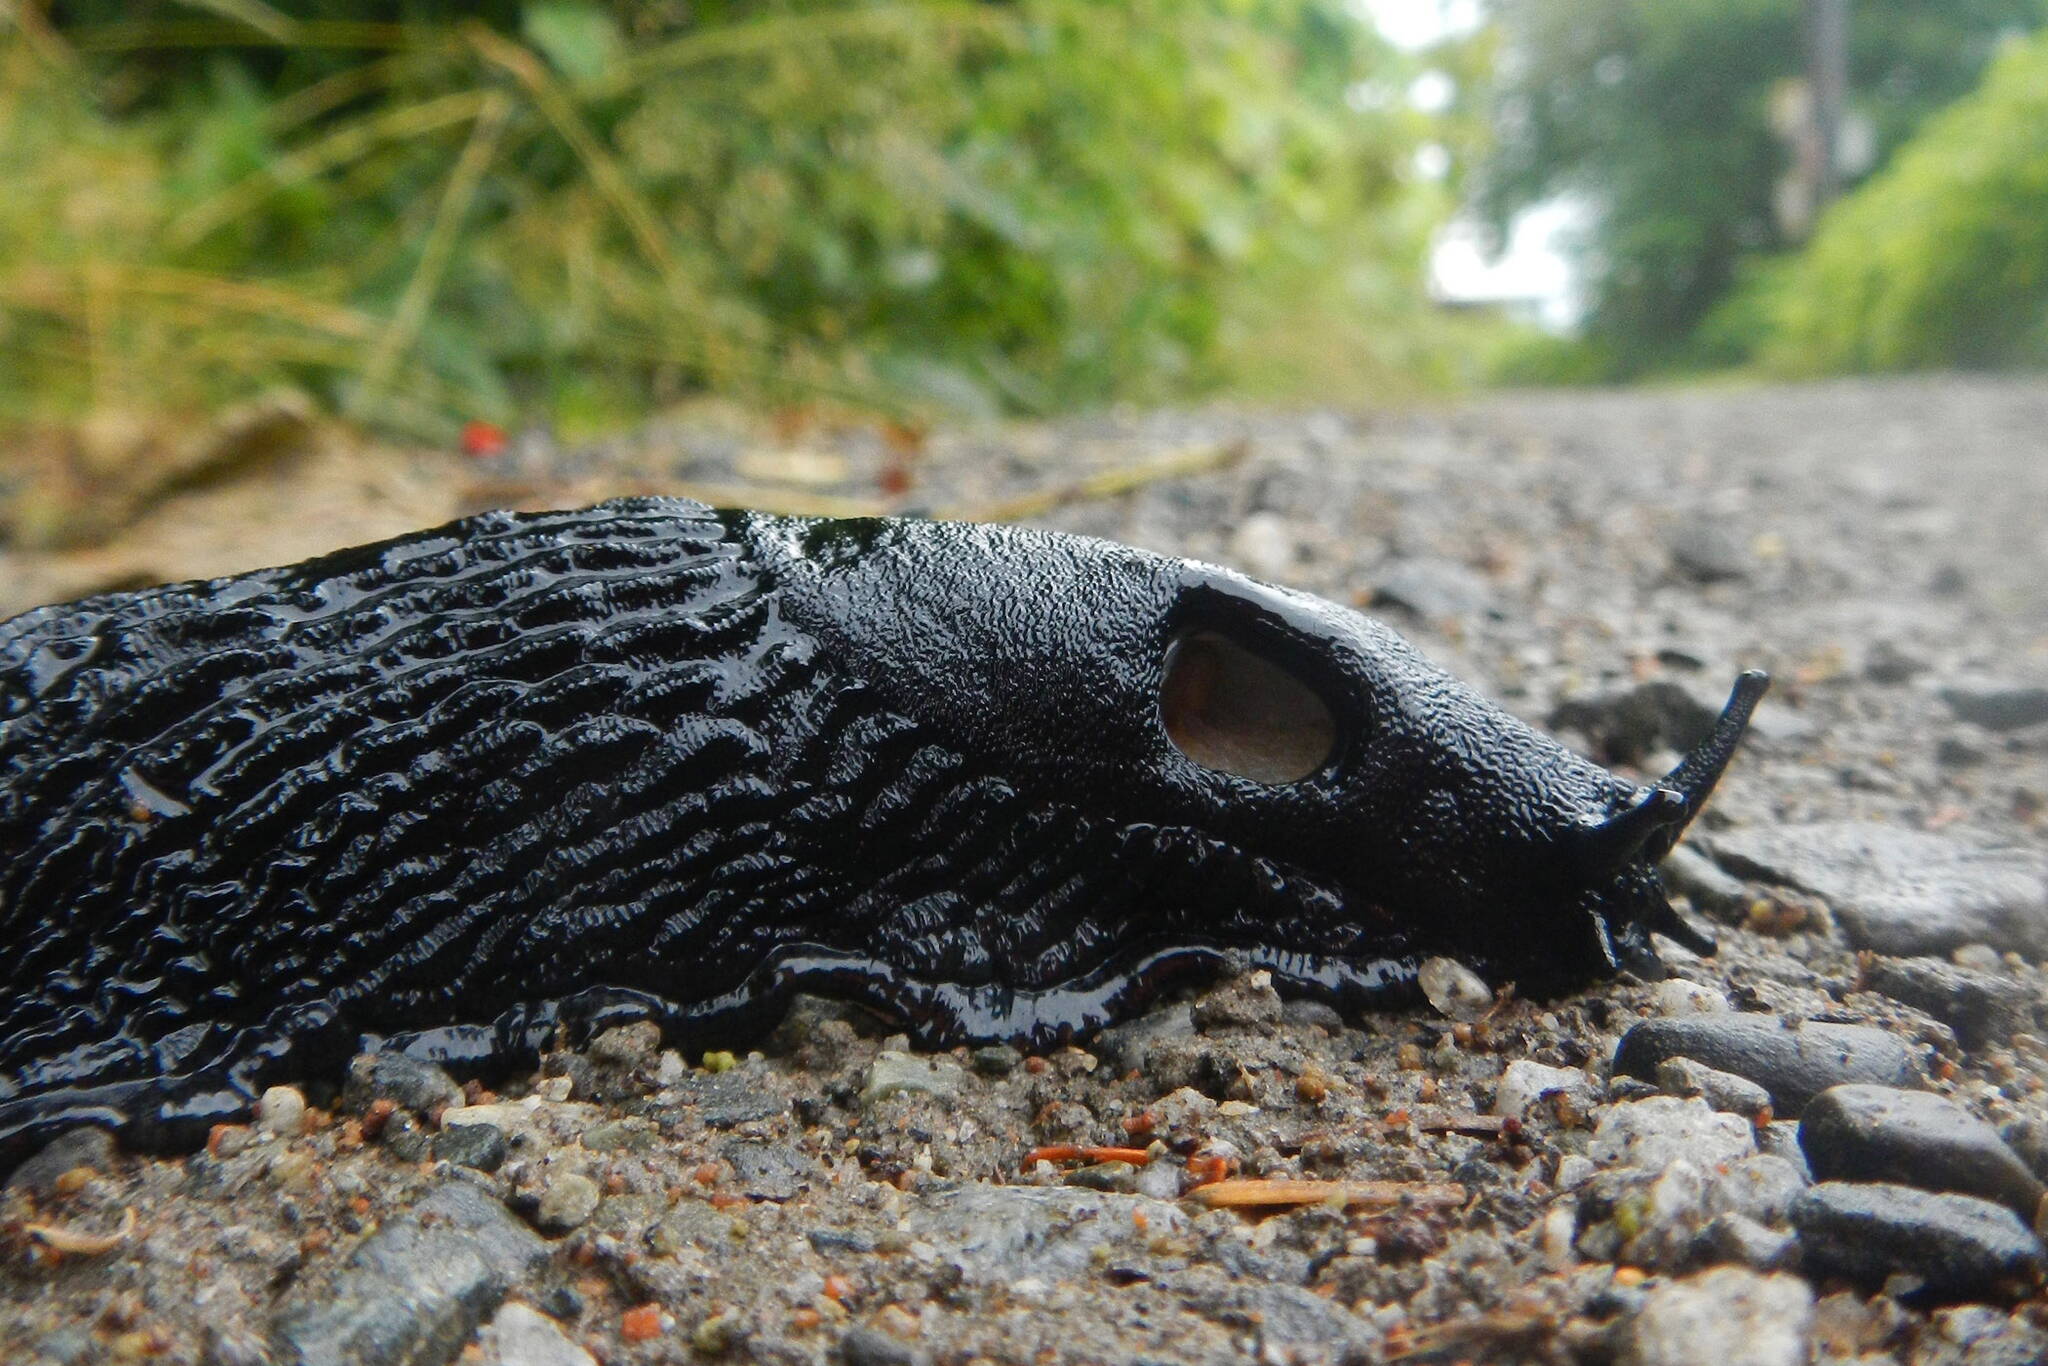 A giant black slug makes its way onto “The Trail,” as the one road in Tenakee Springs is called. Visible is the breathing hole on the side of its body. (Photo by Dimitra Lavrakas)